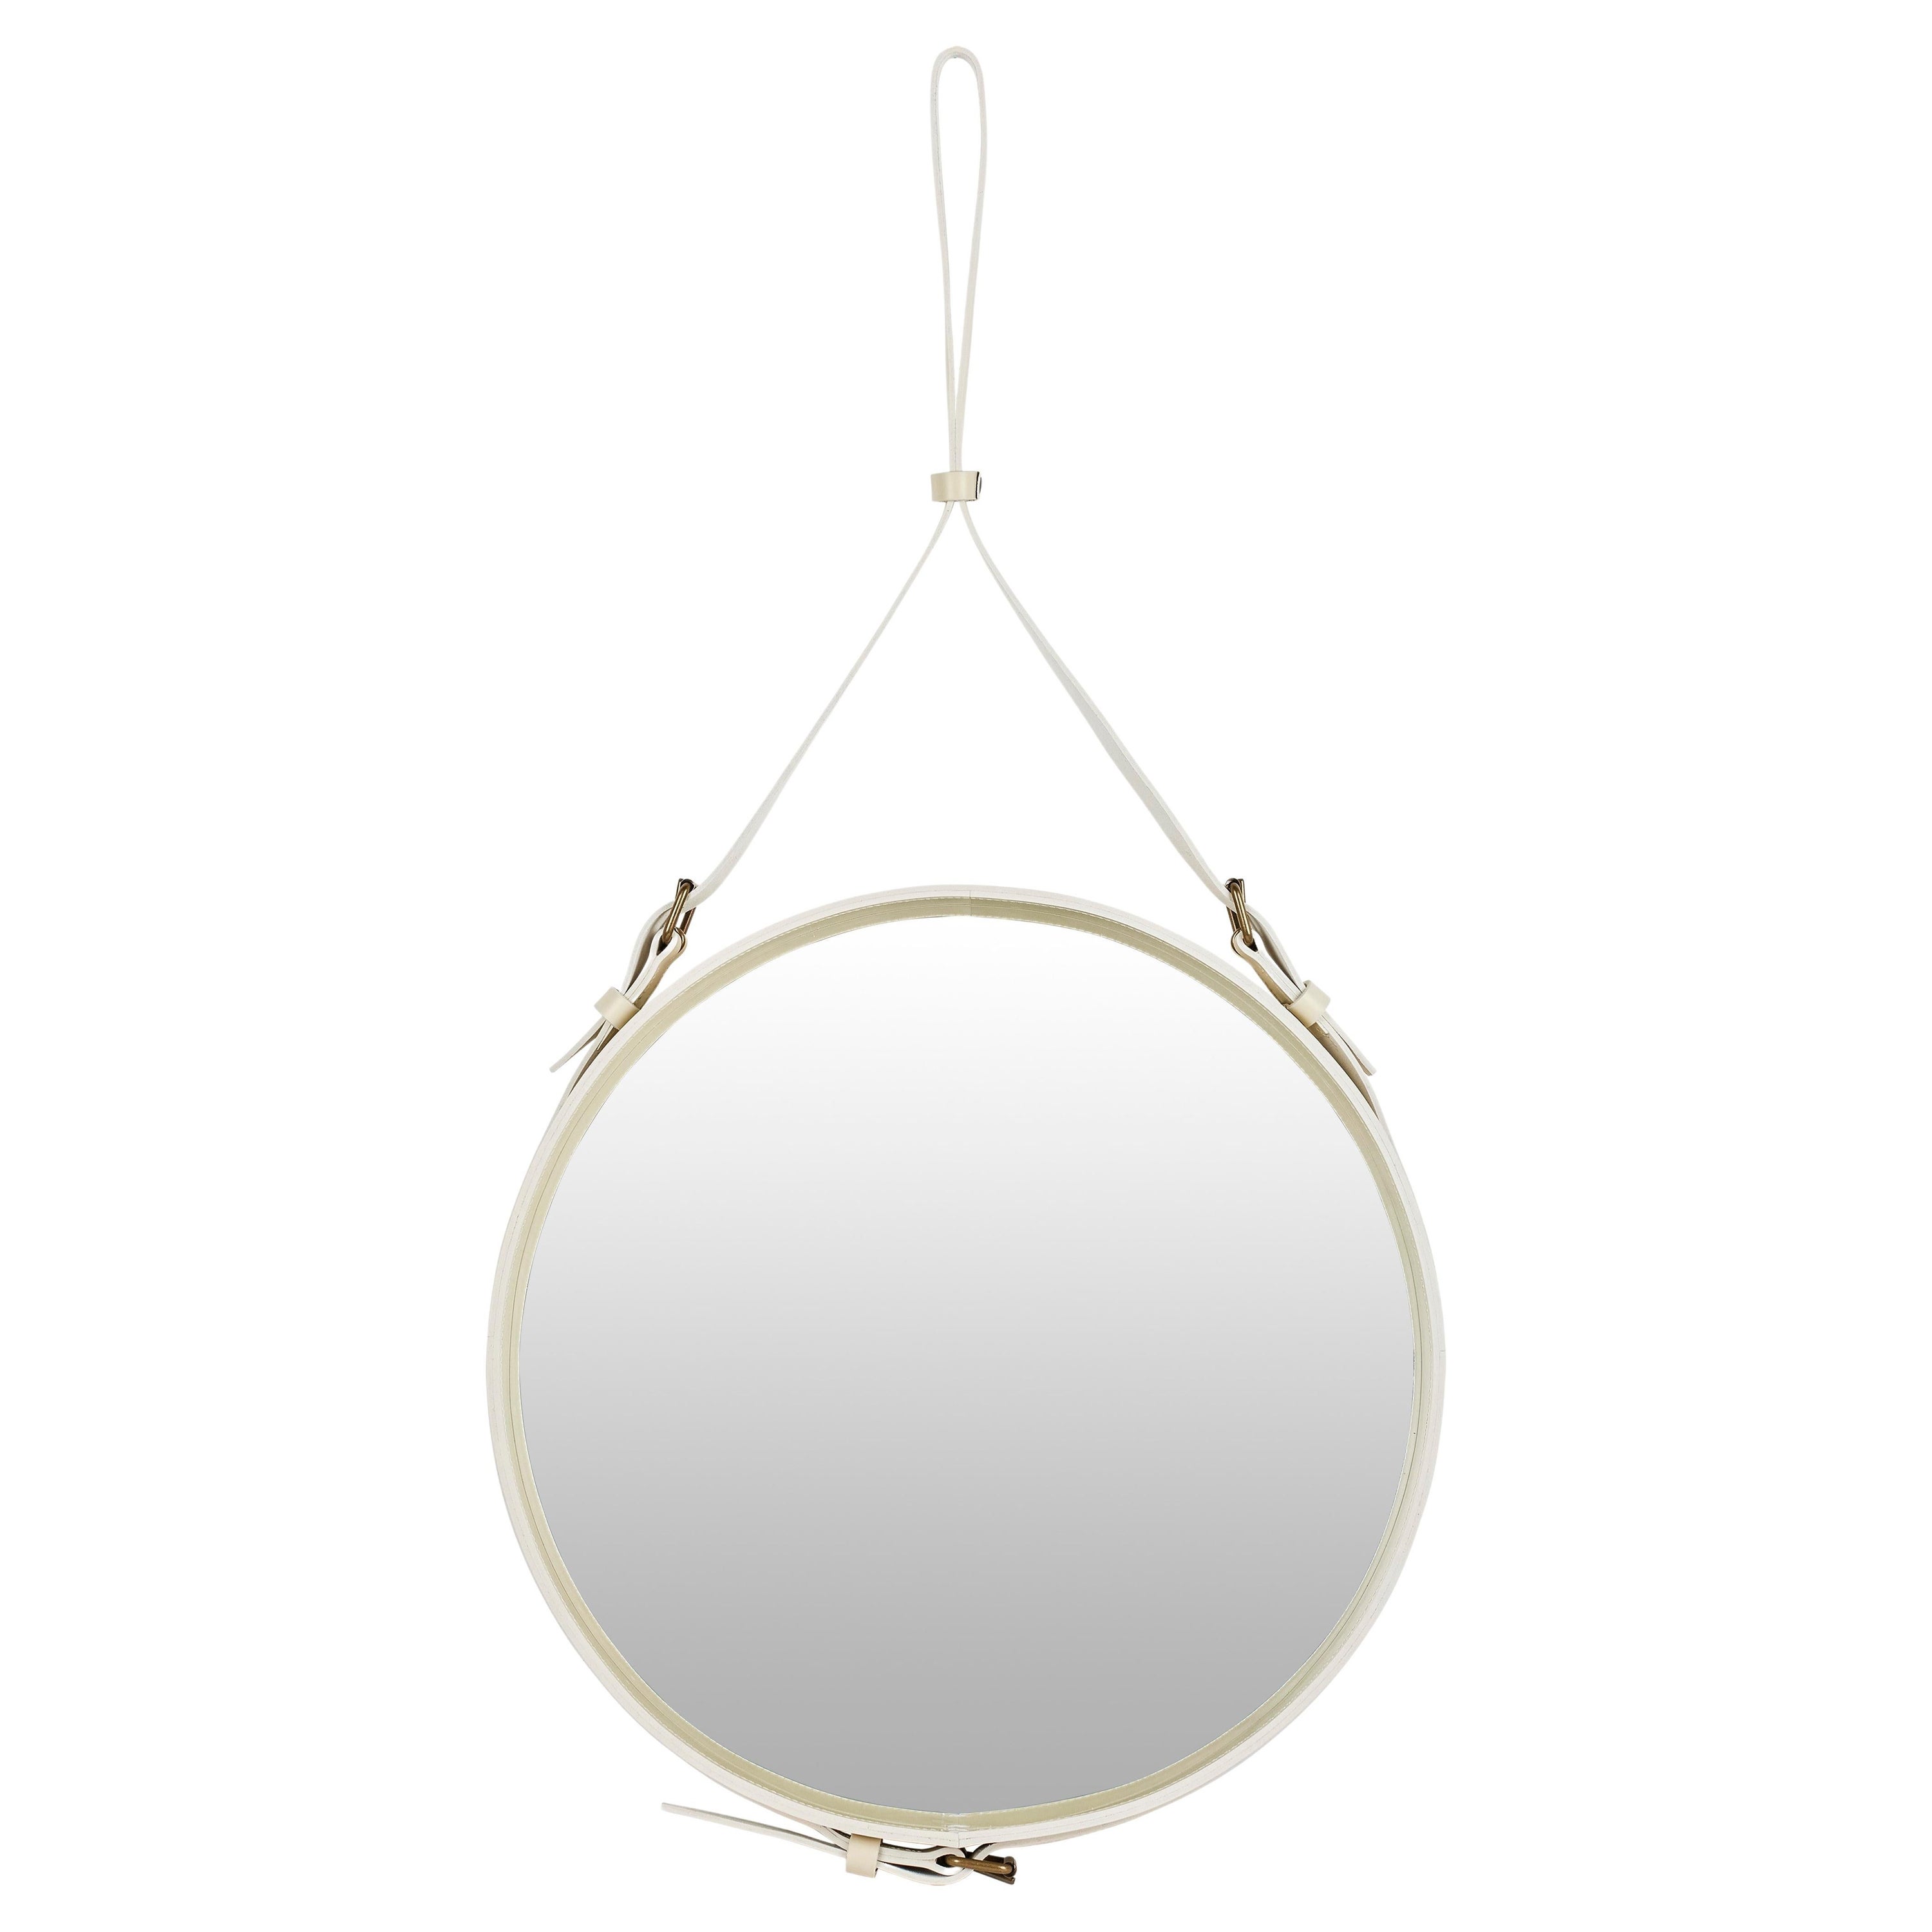 Jacques Adnet Medium Circulaire Mirror with Cream Leather For Sale